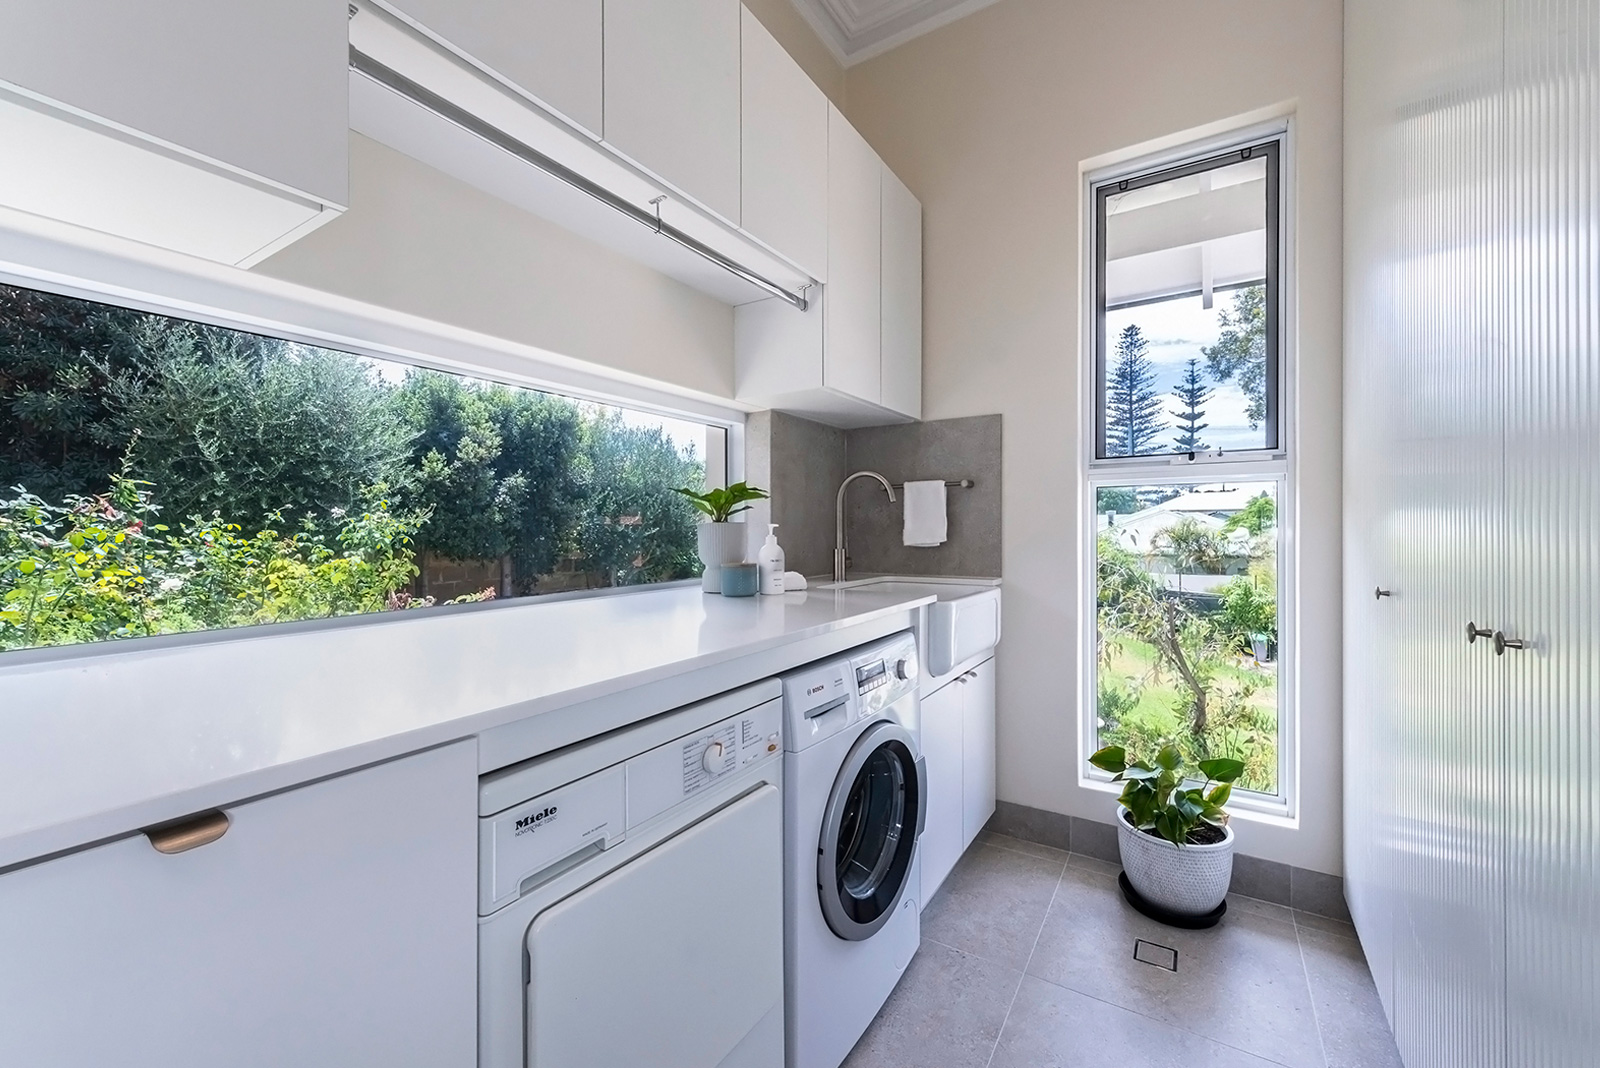 Laundry in Costtesloe apartment with cabinetry designed by Studio Seventy Four